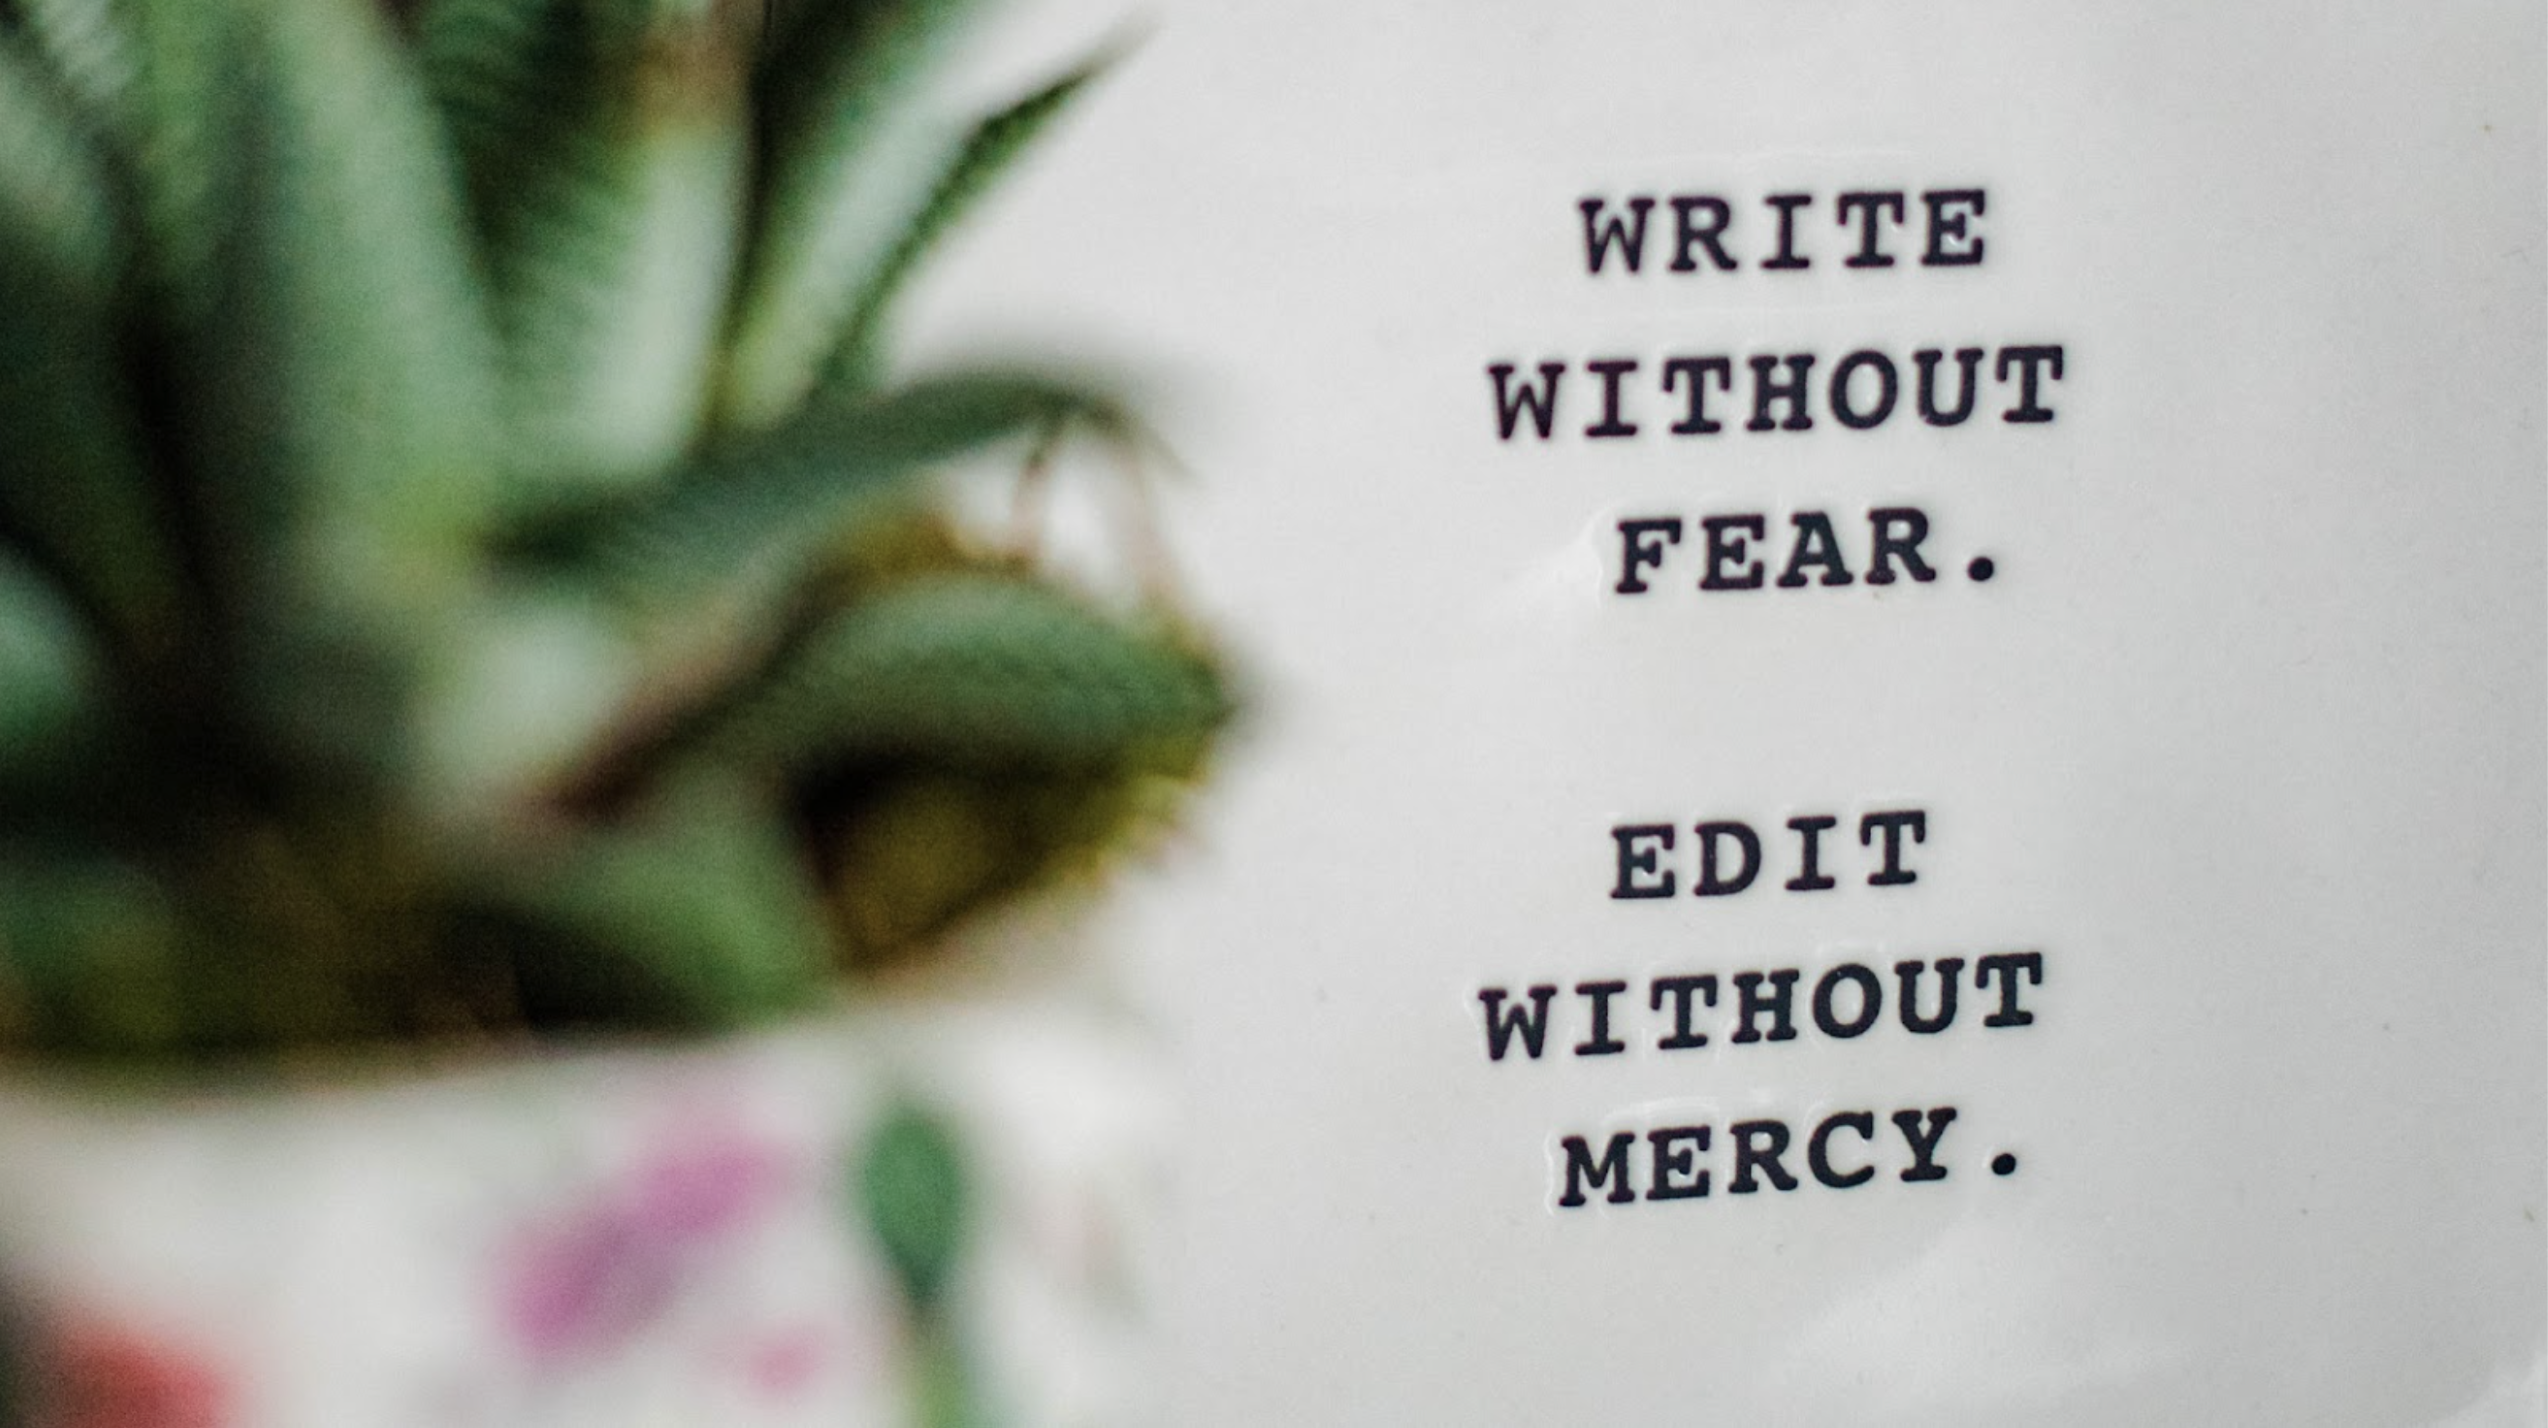 a white box with writing on it that reads "write without fear. edit without mercy."next to a plant